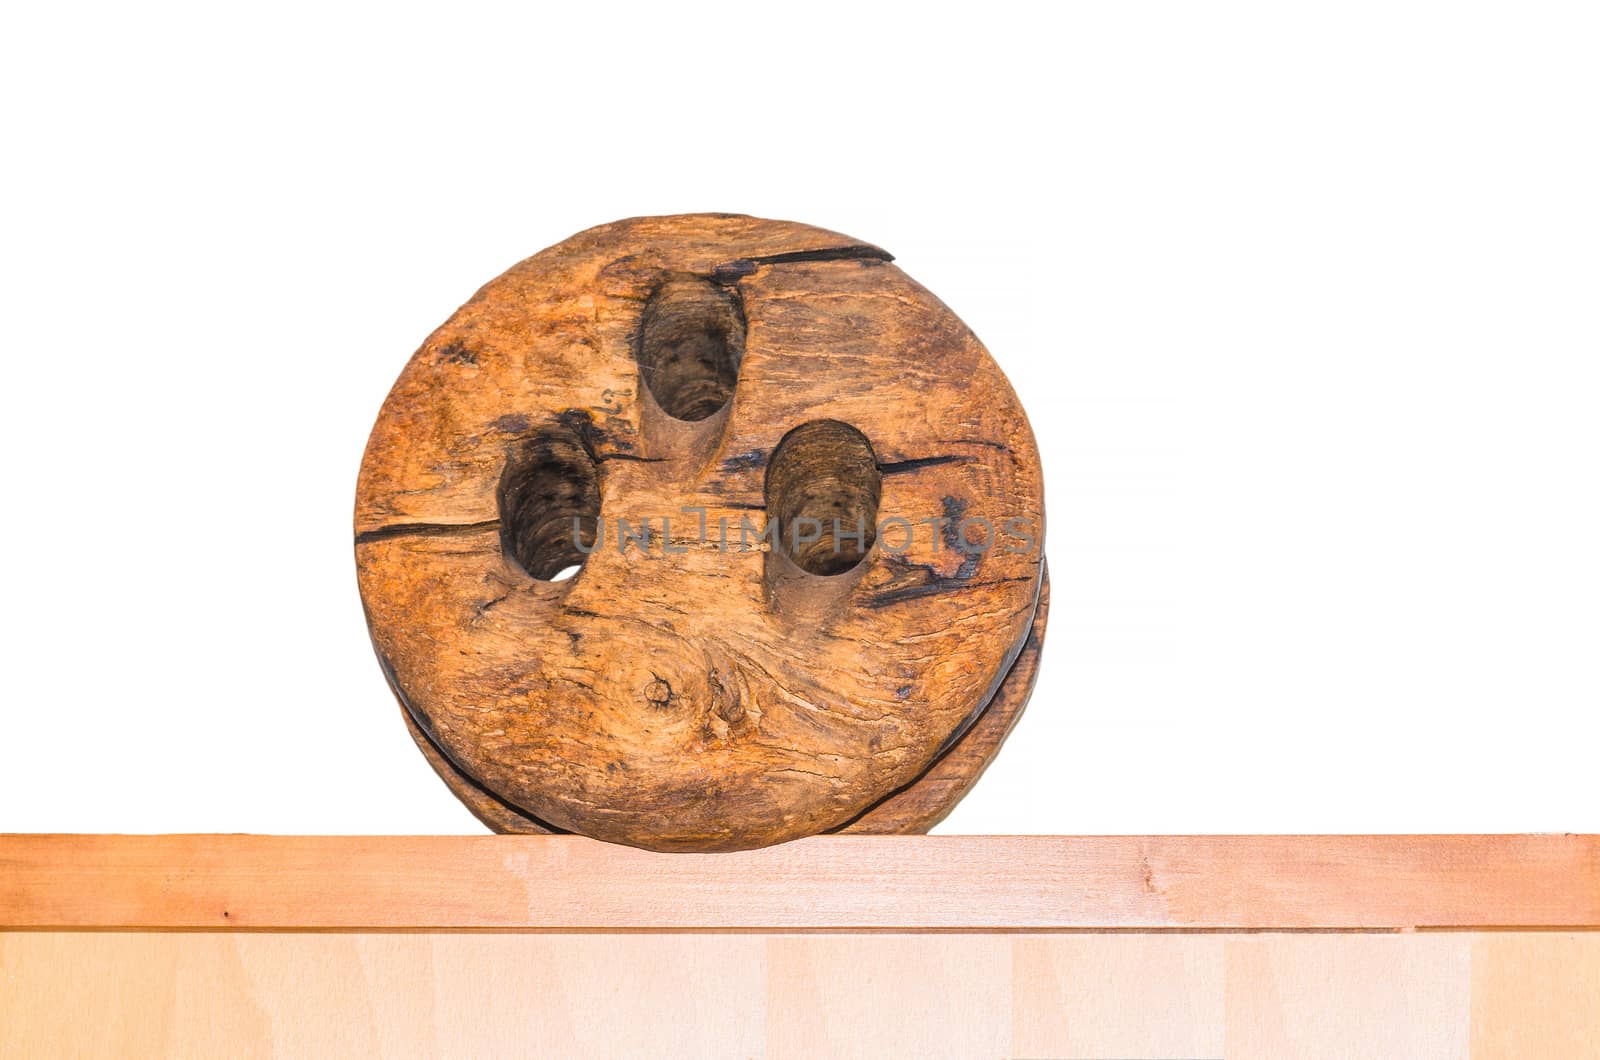  Antique wooden pulley by JFsPic